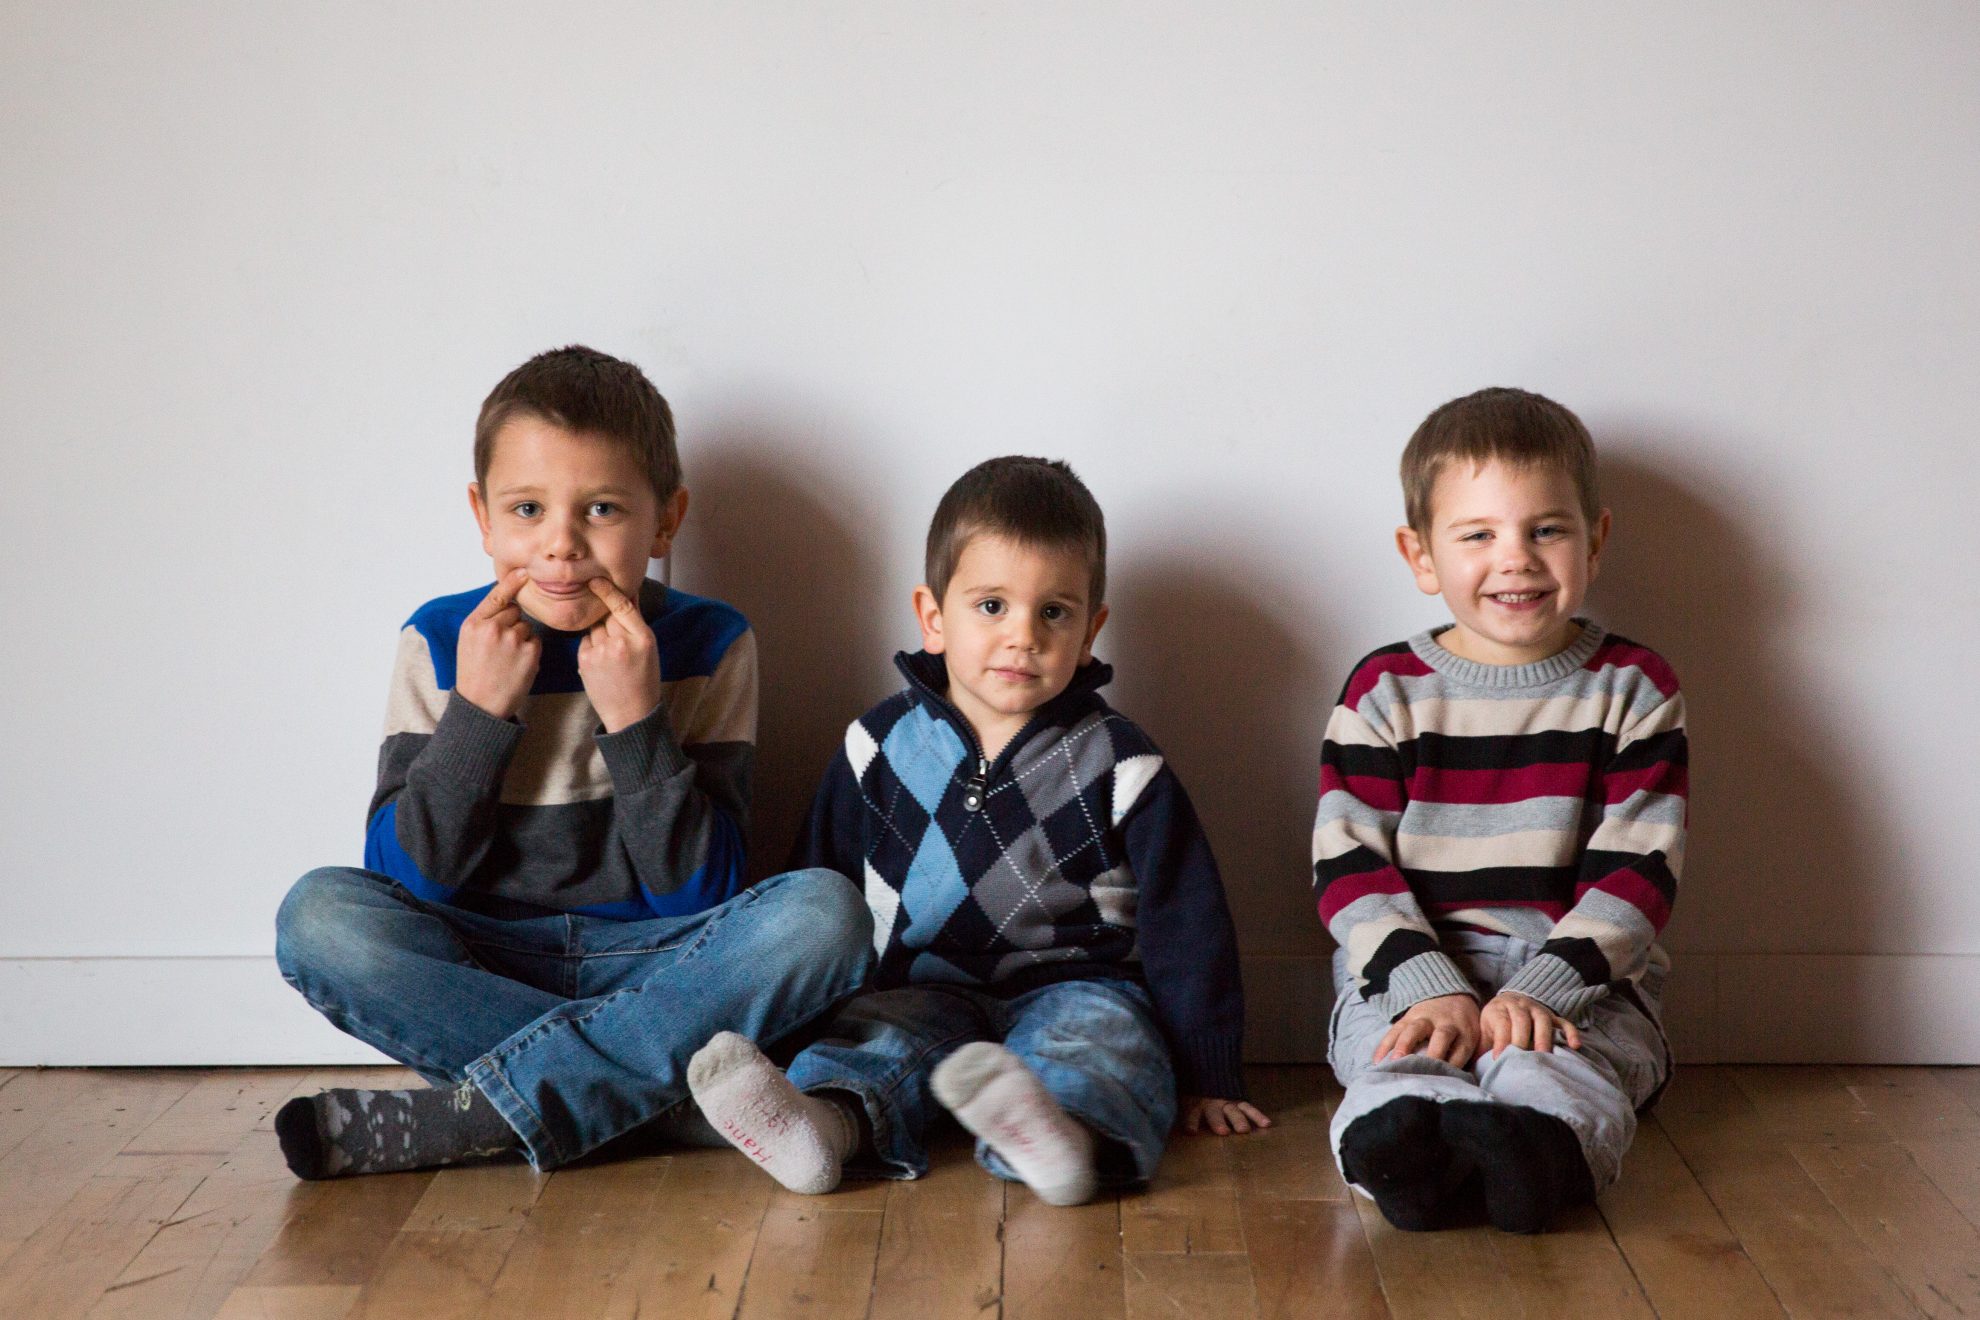 One mom's humorous take on what it is like to raise 3 sons